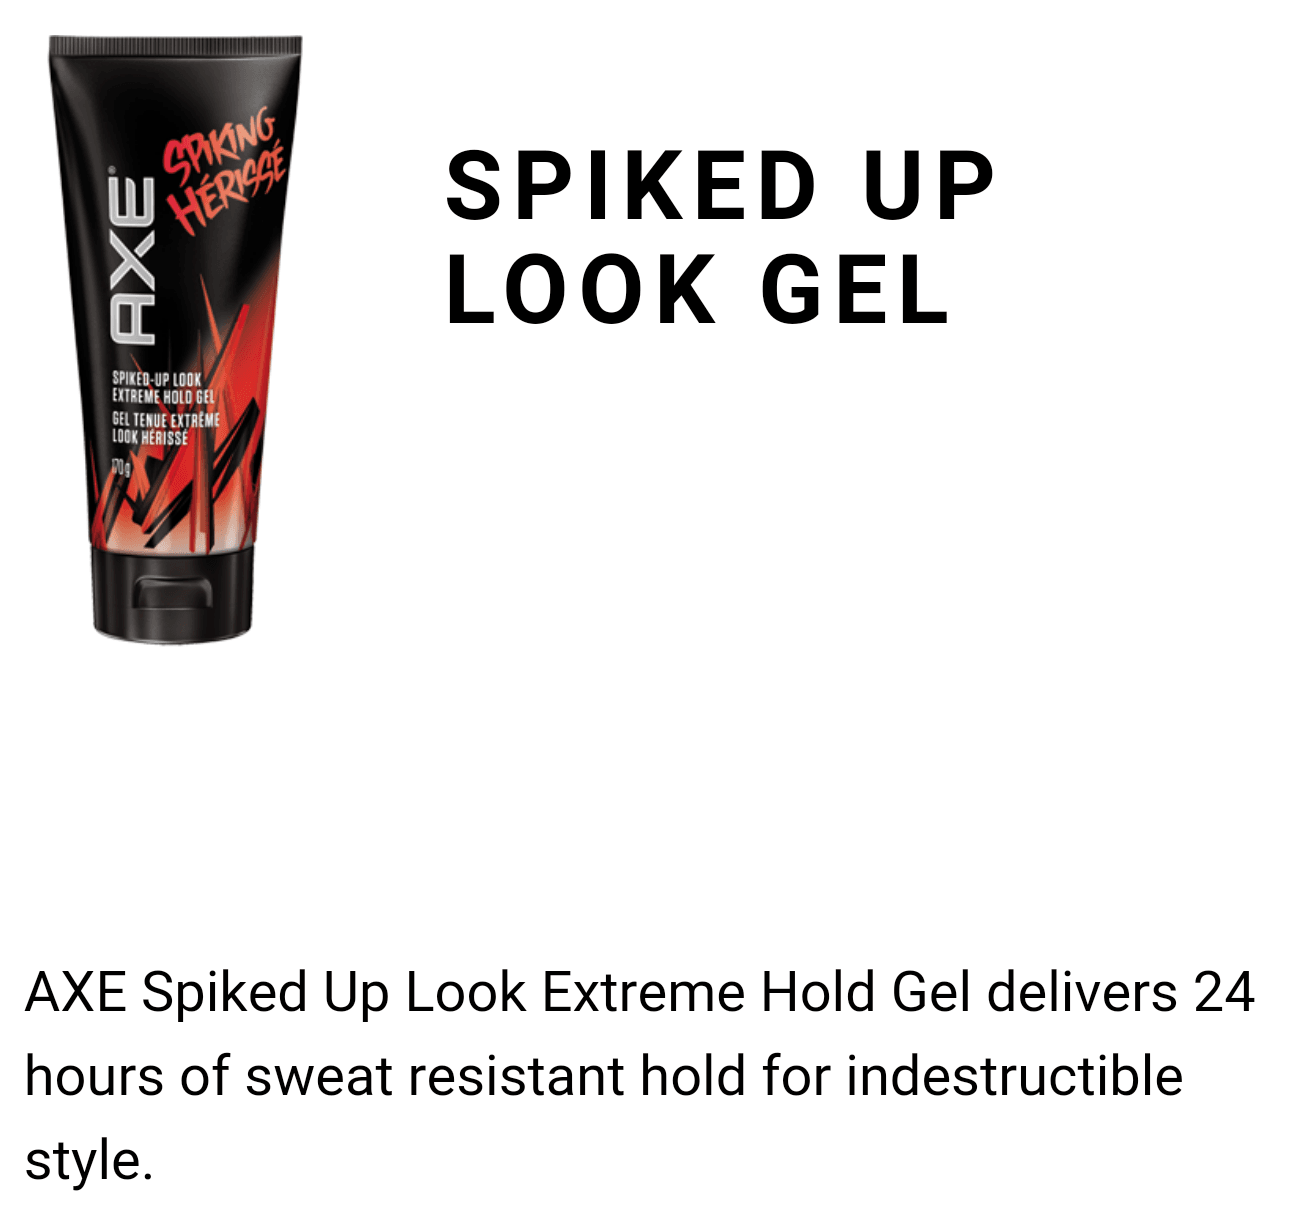 AXEGOTSTYLE-Spiked-Up-Look-Gel